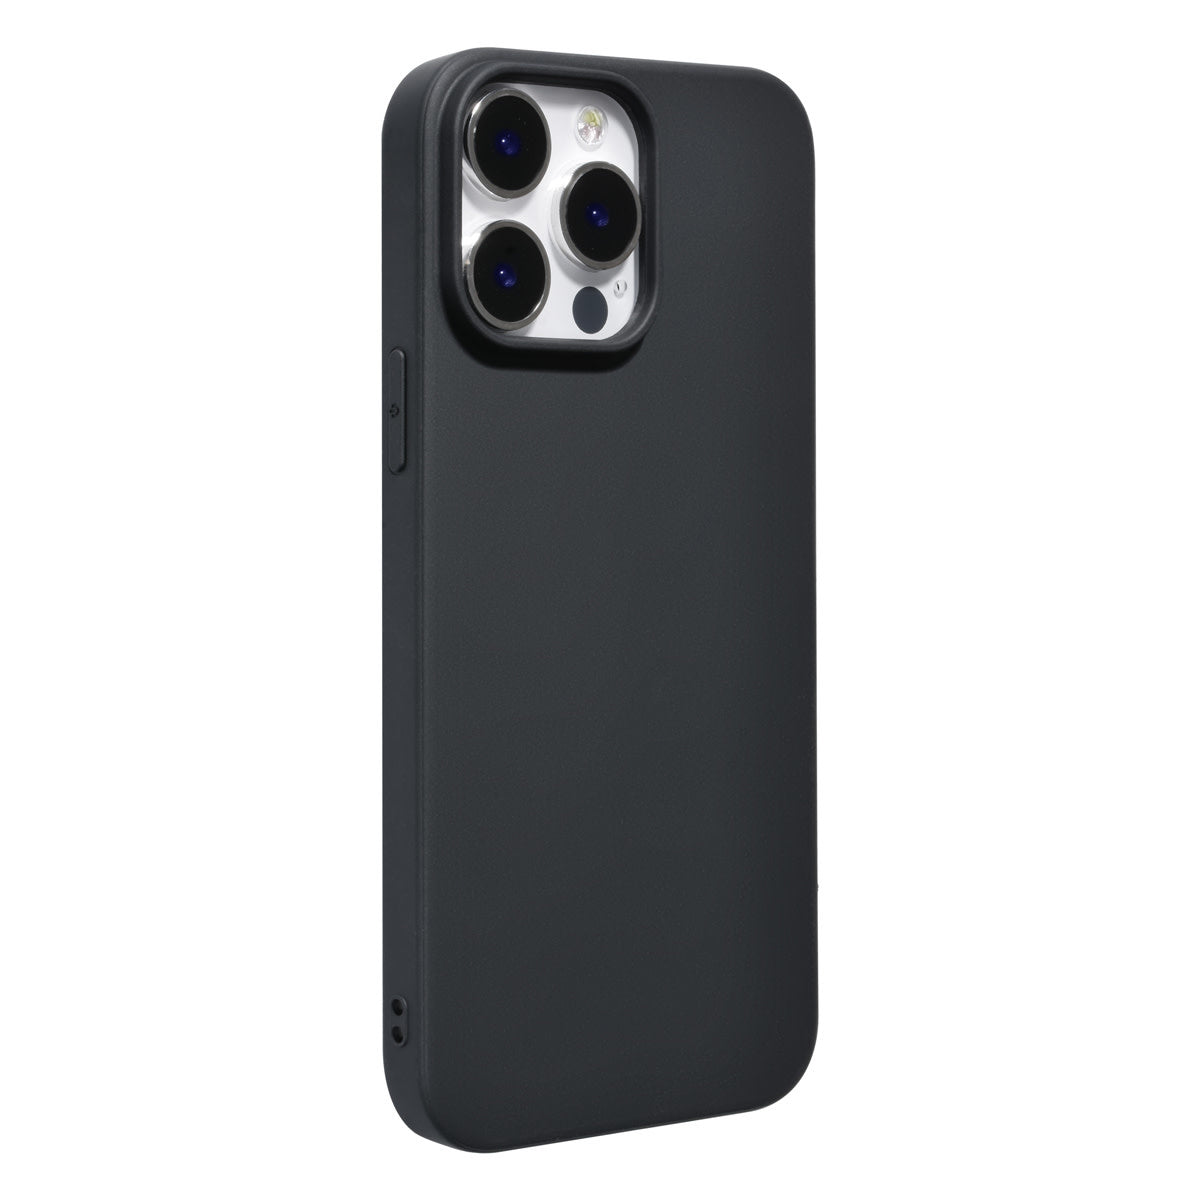 iPhone 12 PRO MAX Backcover - Silicoon hoesje - Zwart